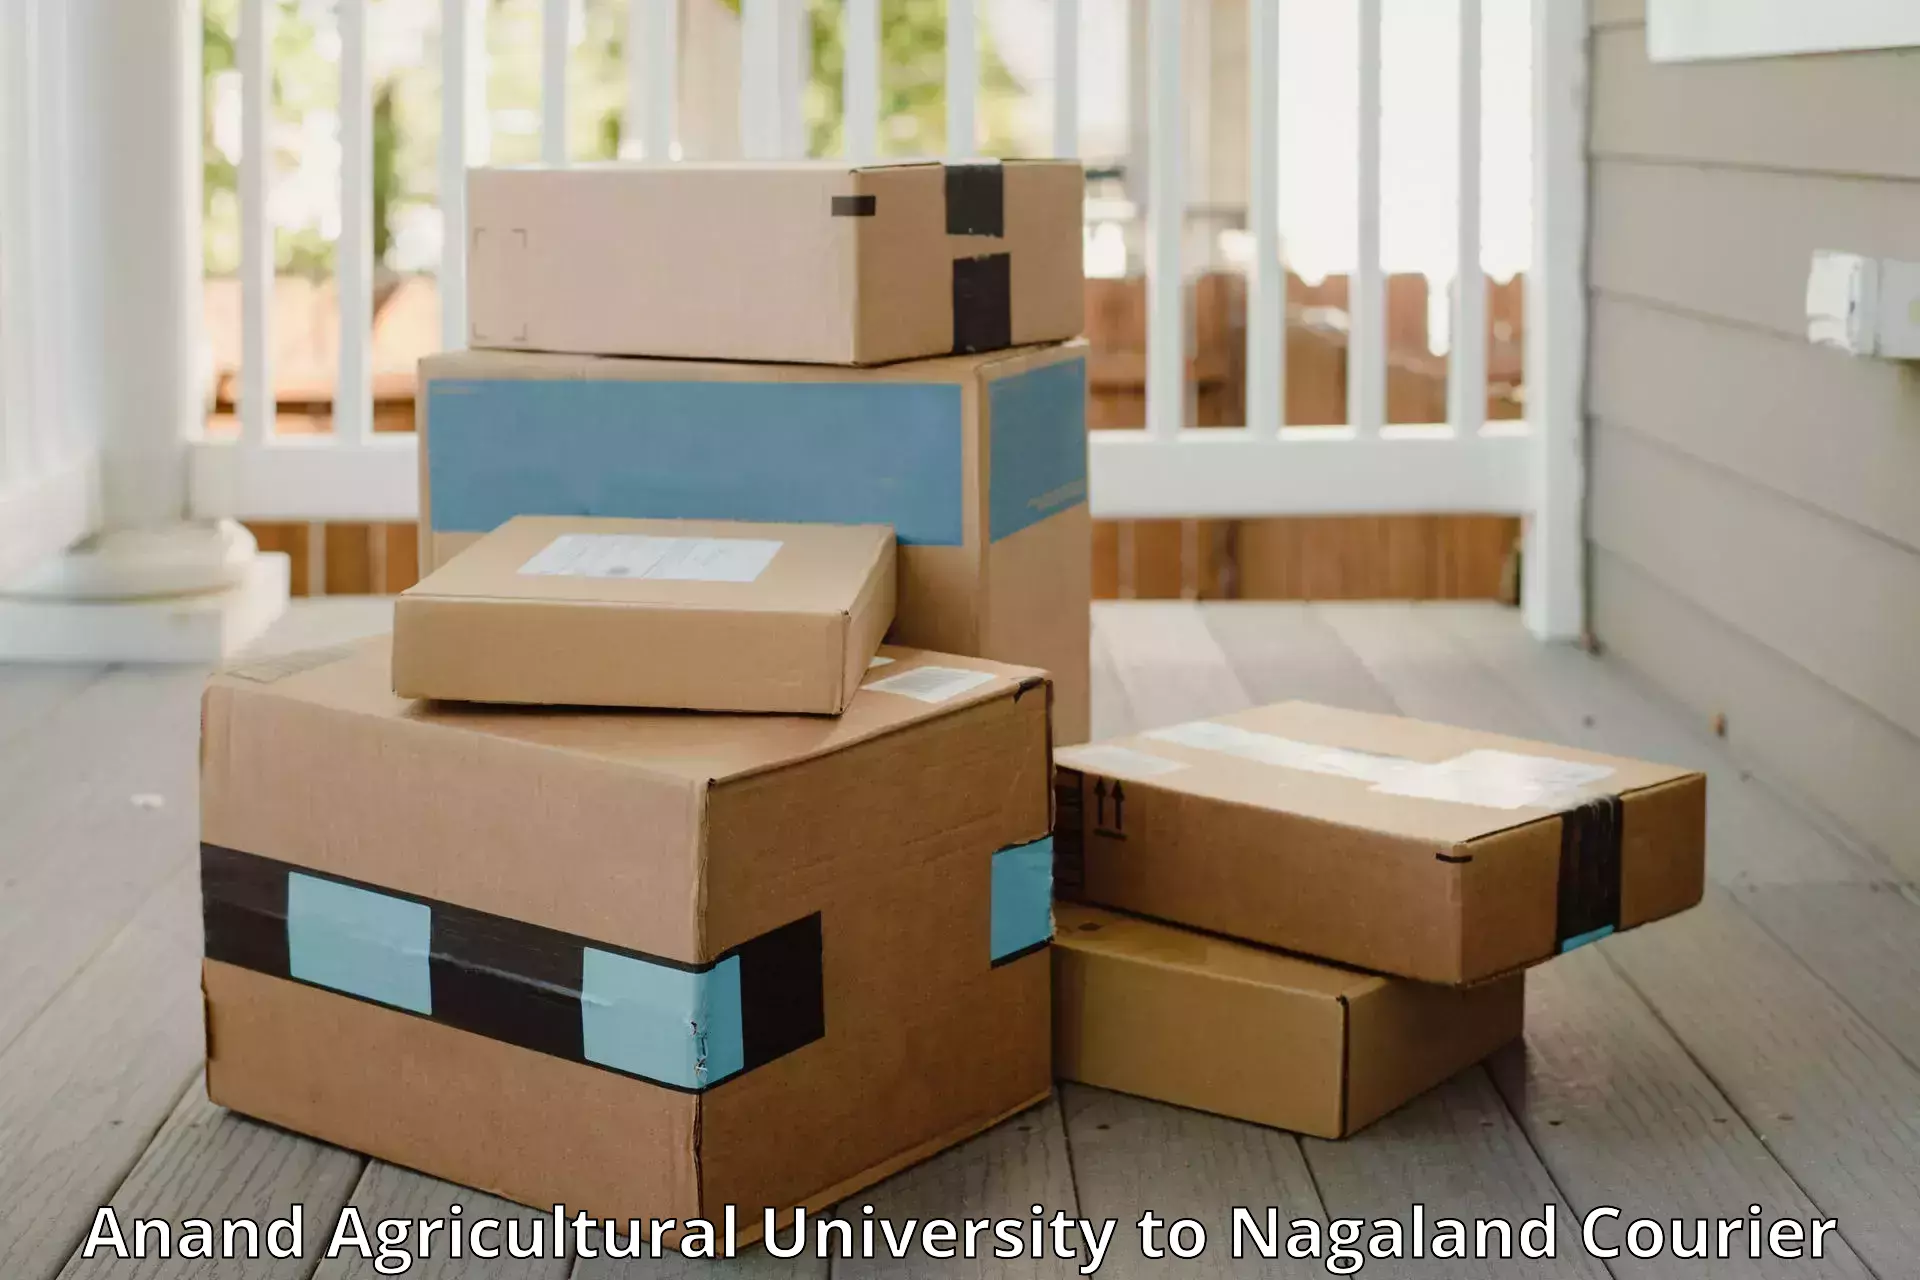 Express baggage shipping Anand Agricultural University to Mokokchung